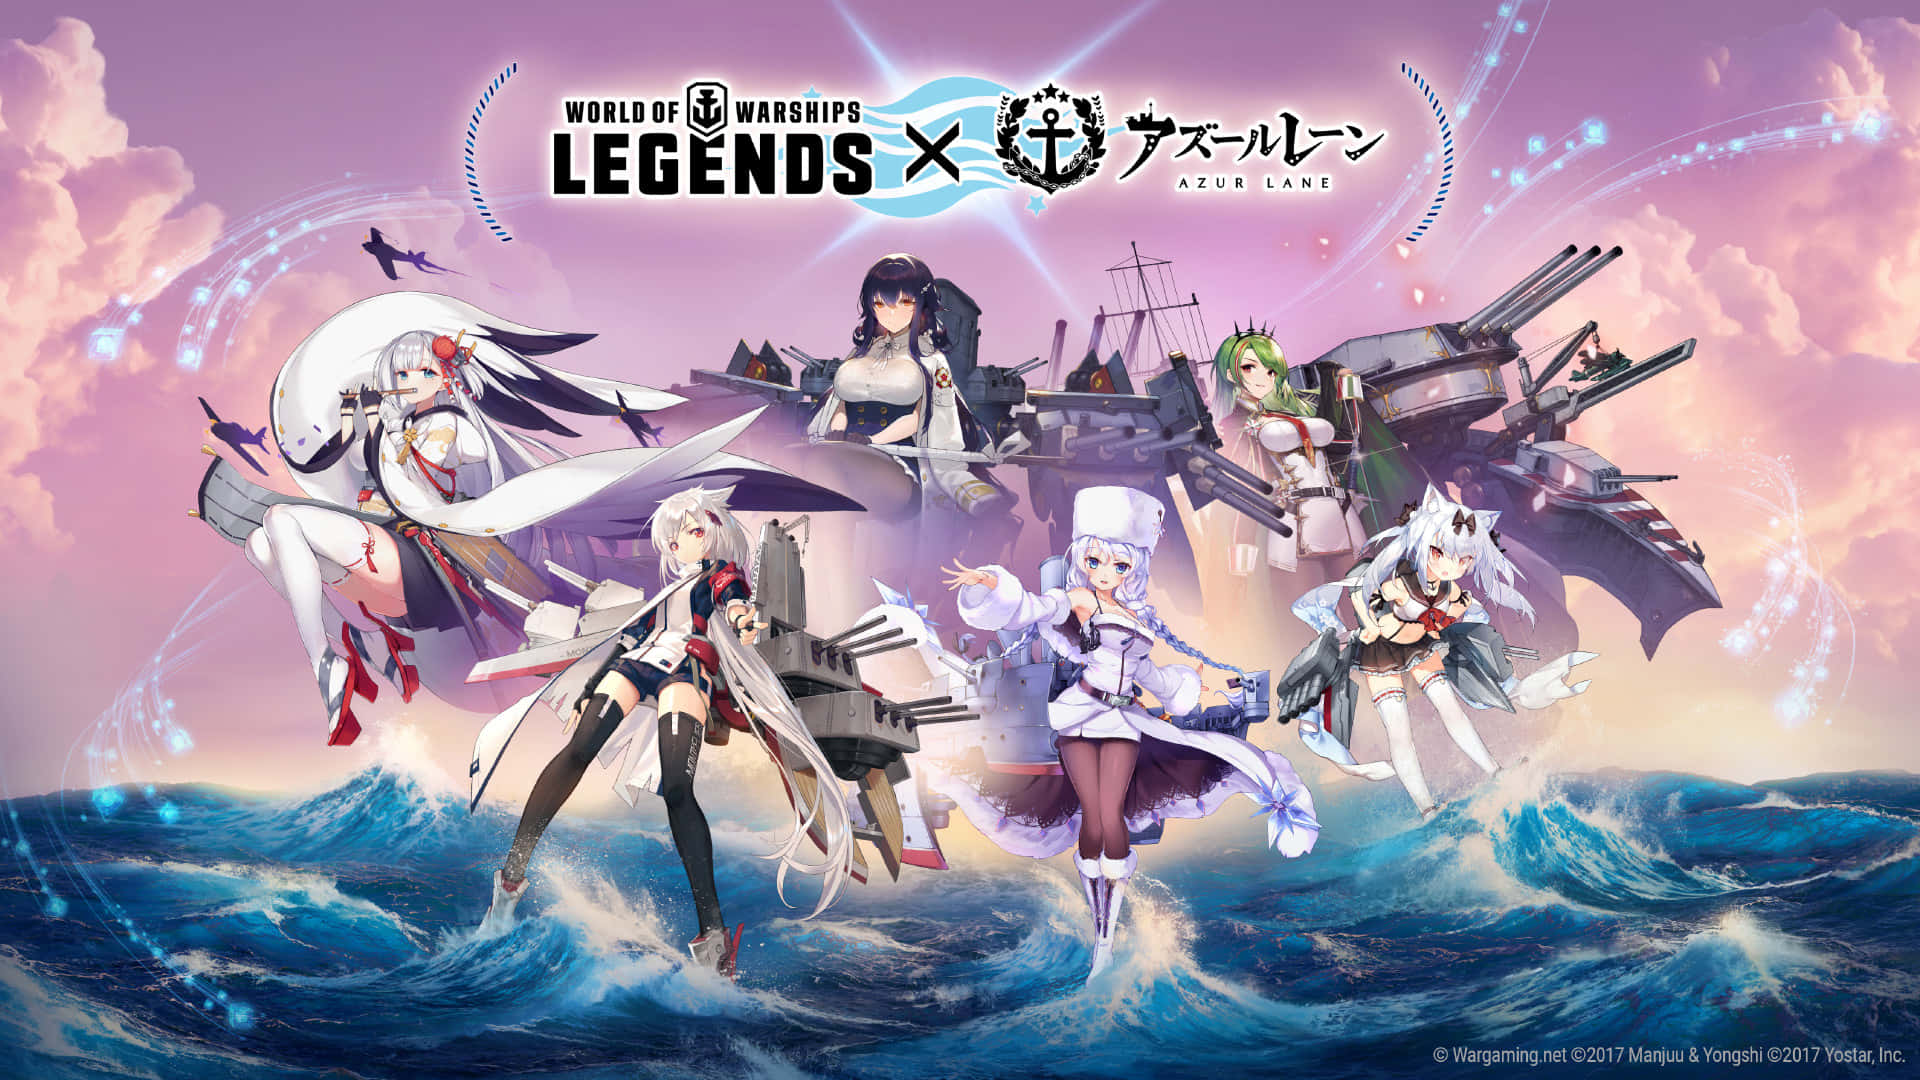 Join the battle to save humanity in Azur Lane!